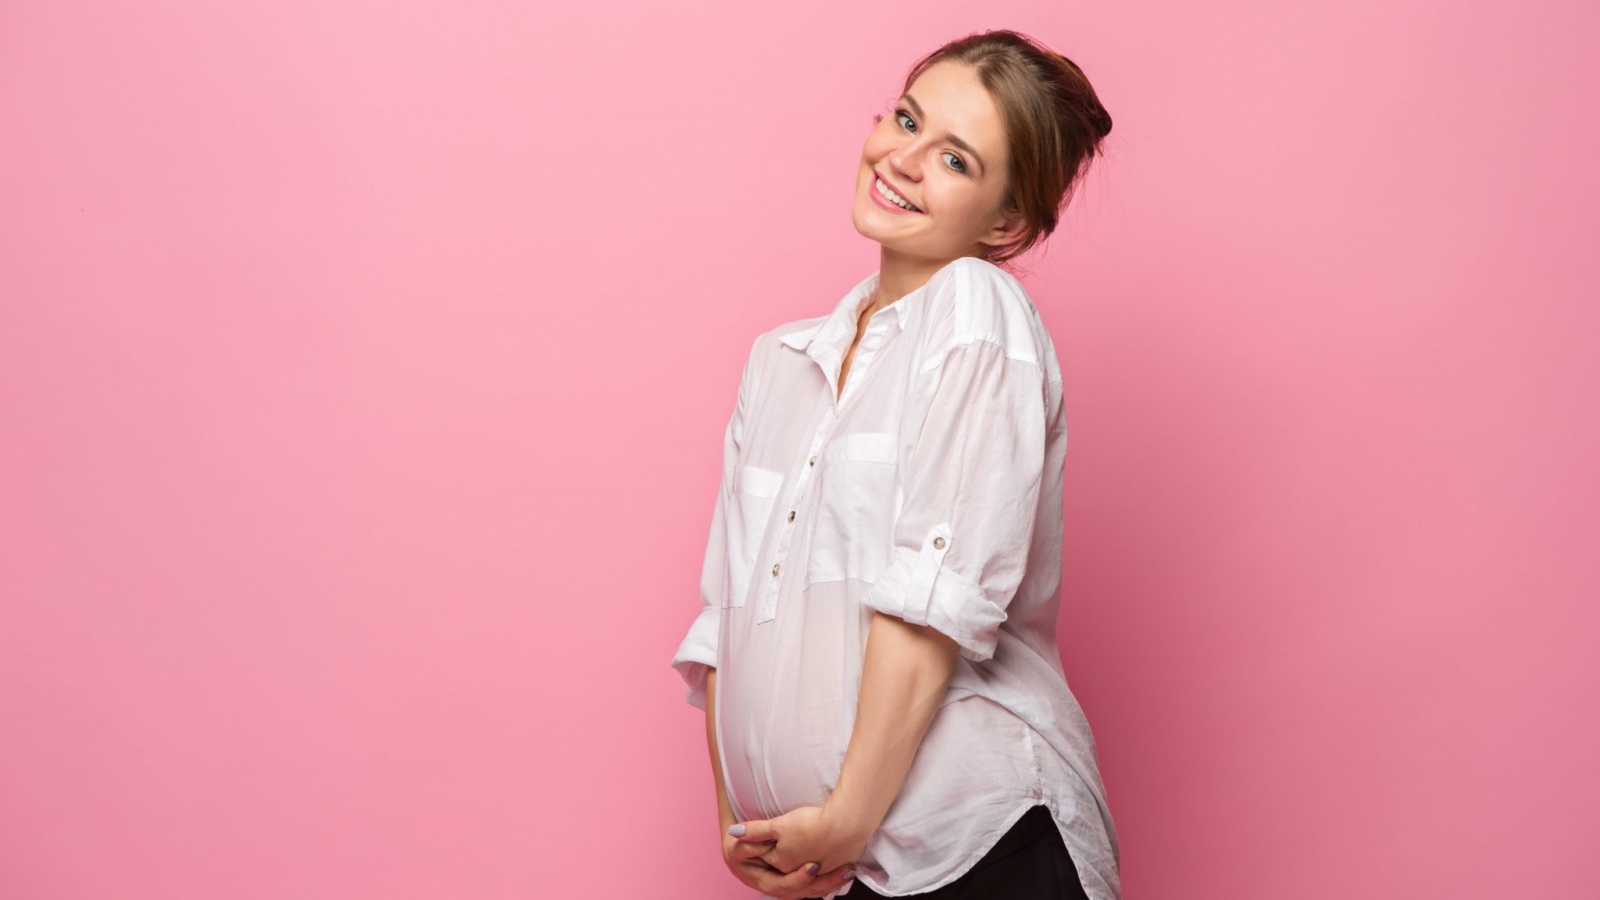 Pregnant woman against pink background